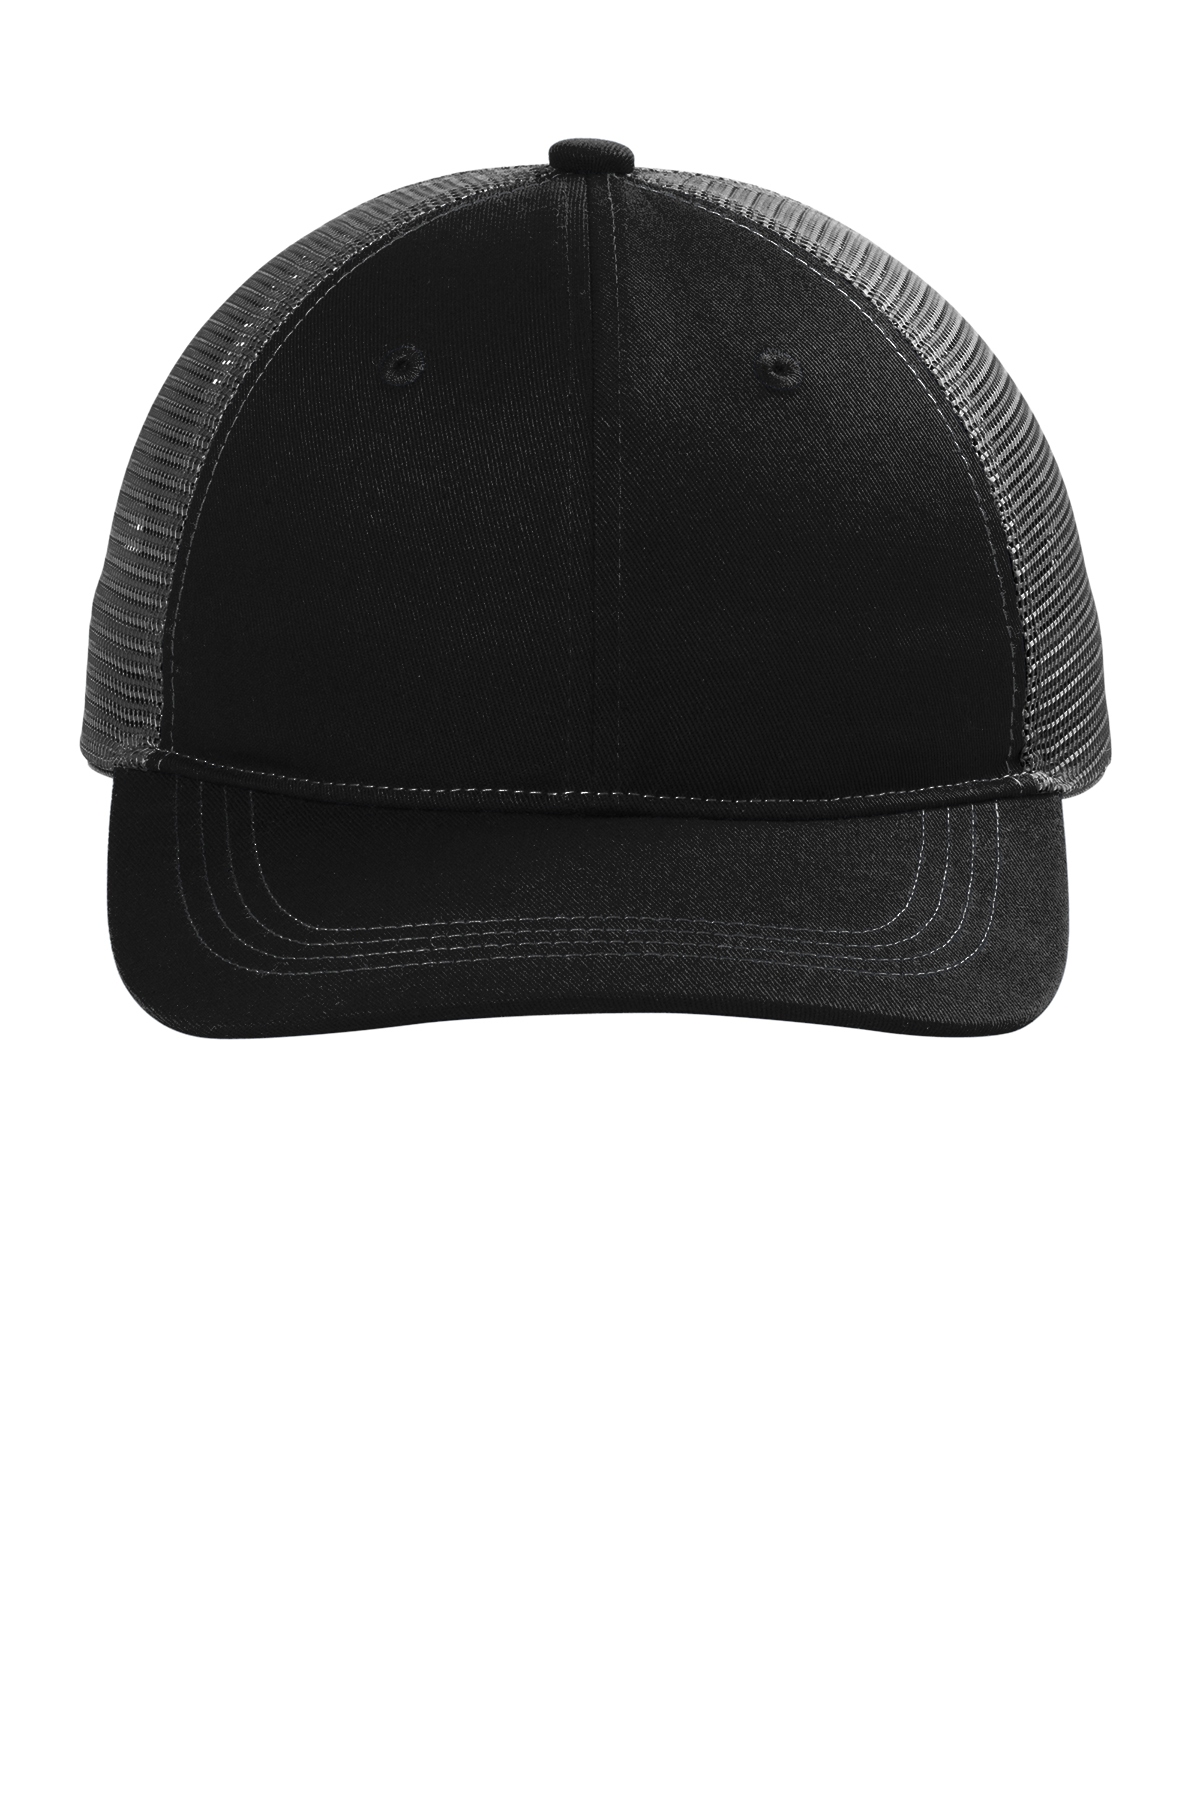 Port Authority Unstructured Snapback Trucker Cap, Product